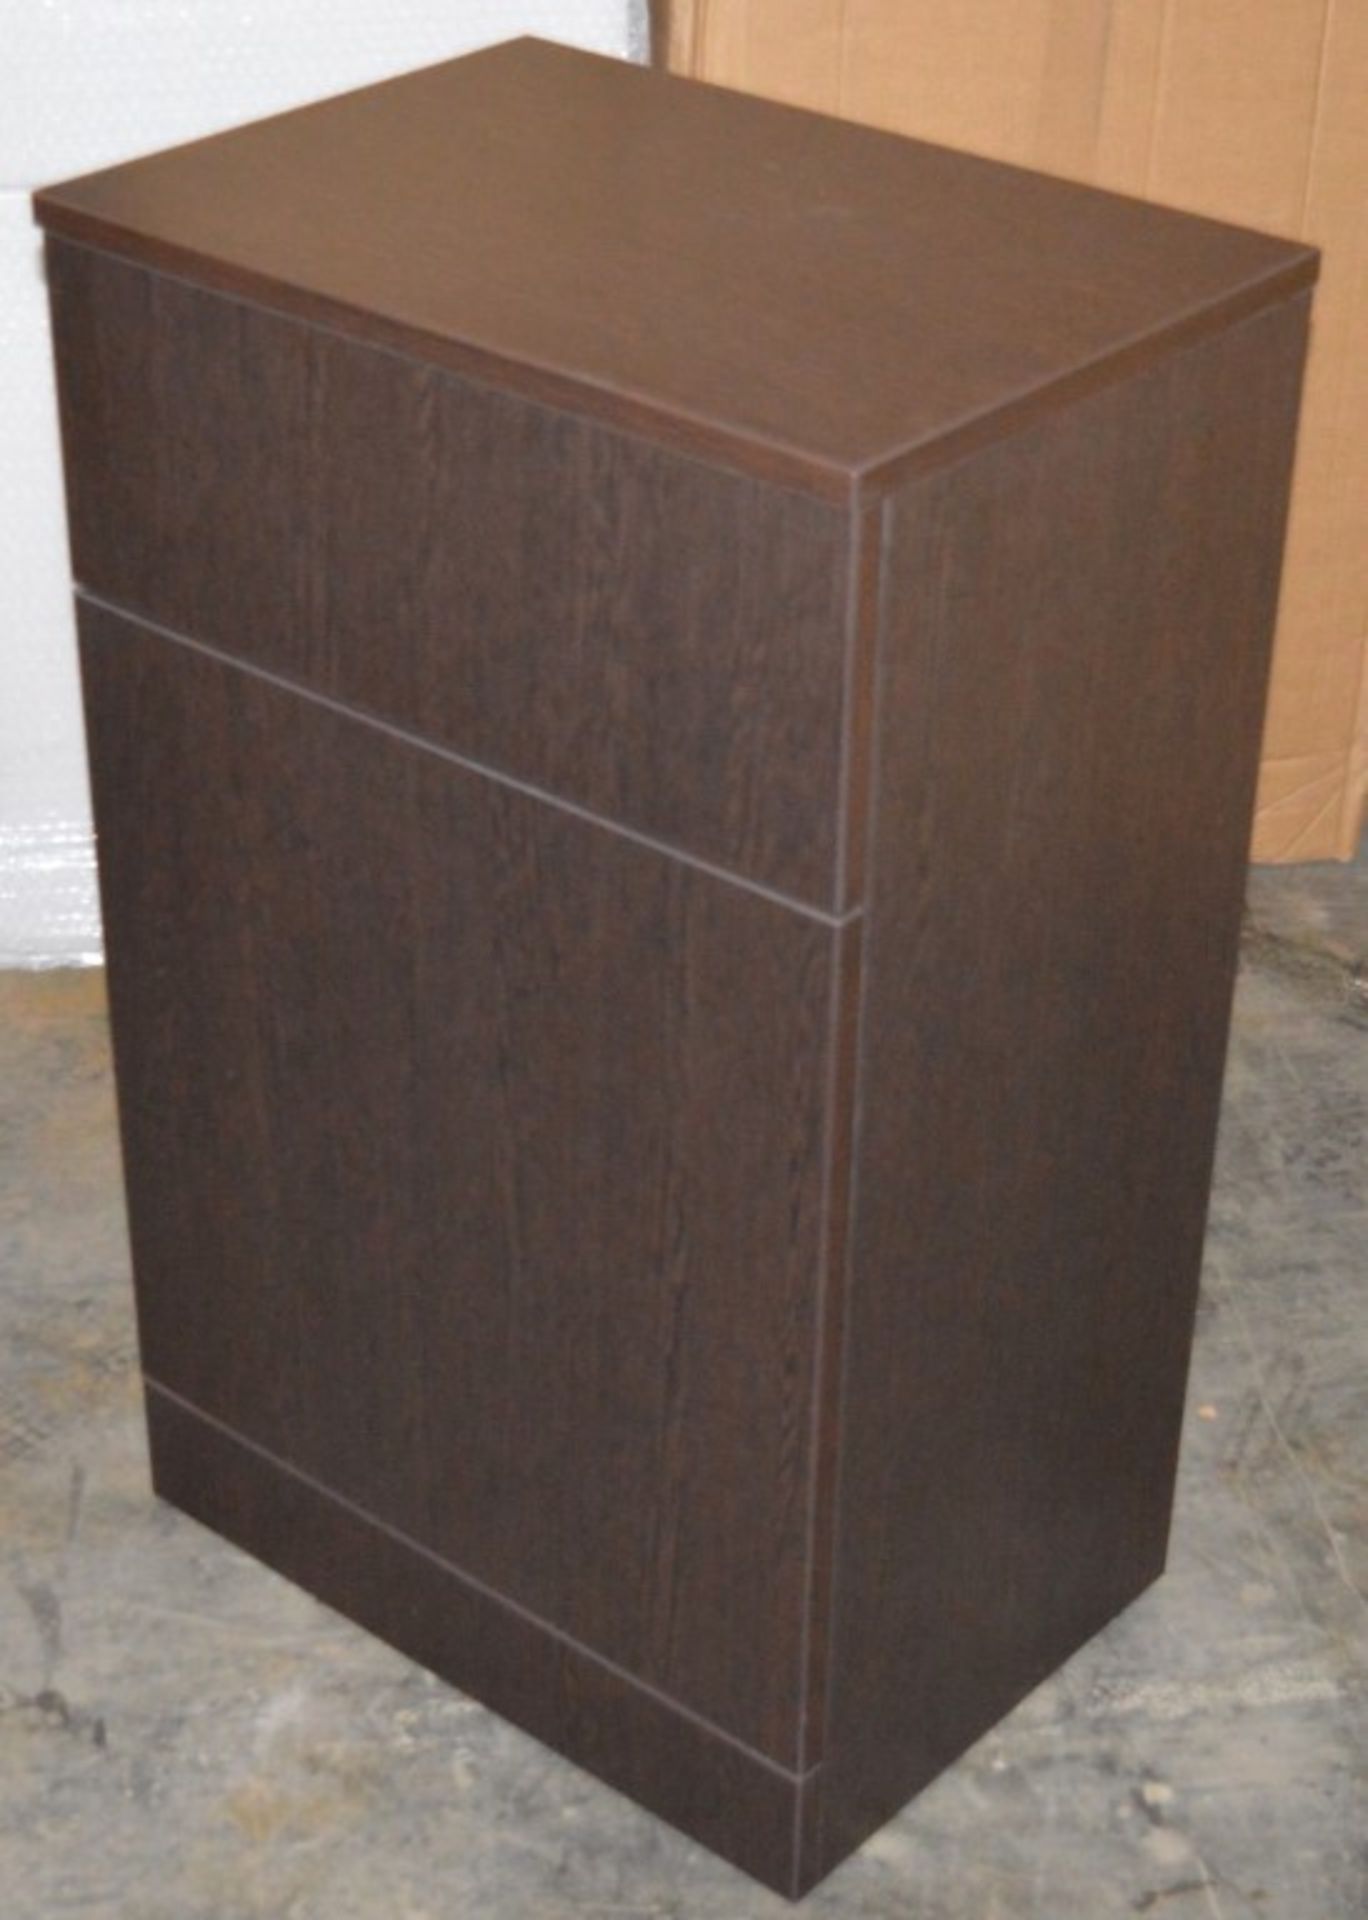 1 x Venizia BTW Toilet Pan Unit in Wenge With Concealed Cistern - 500mm Width - Includes Push Button - Image 2 of 5